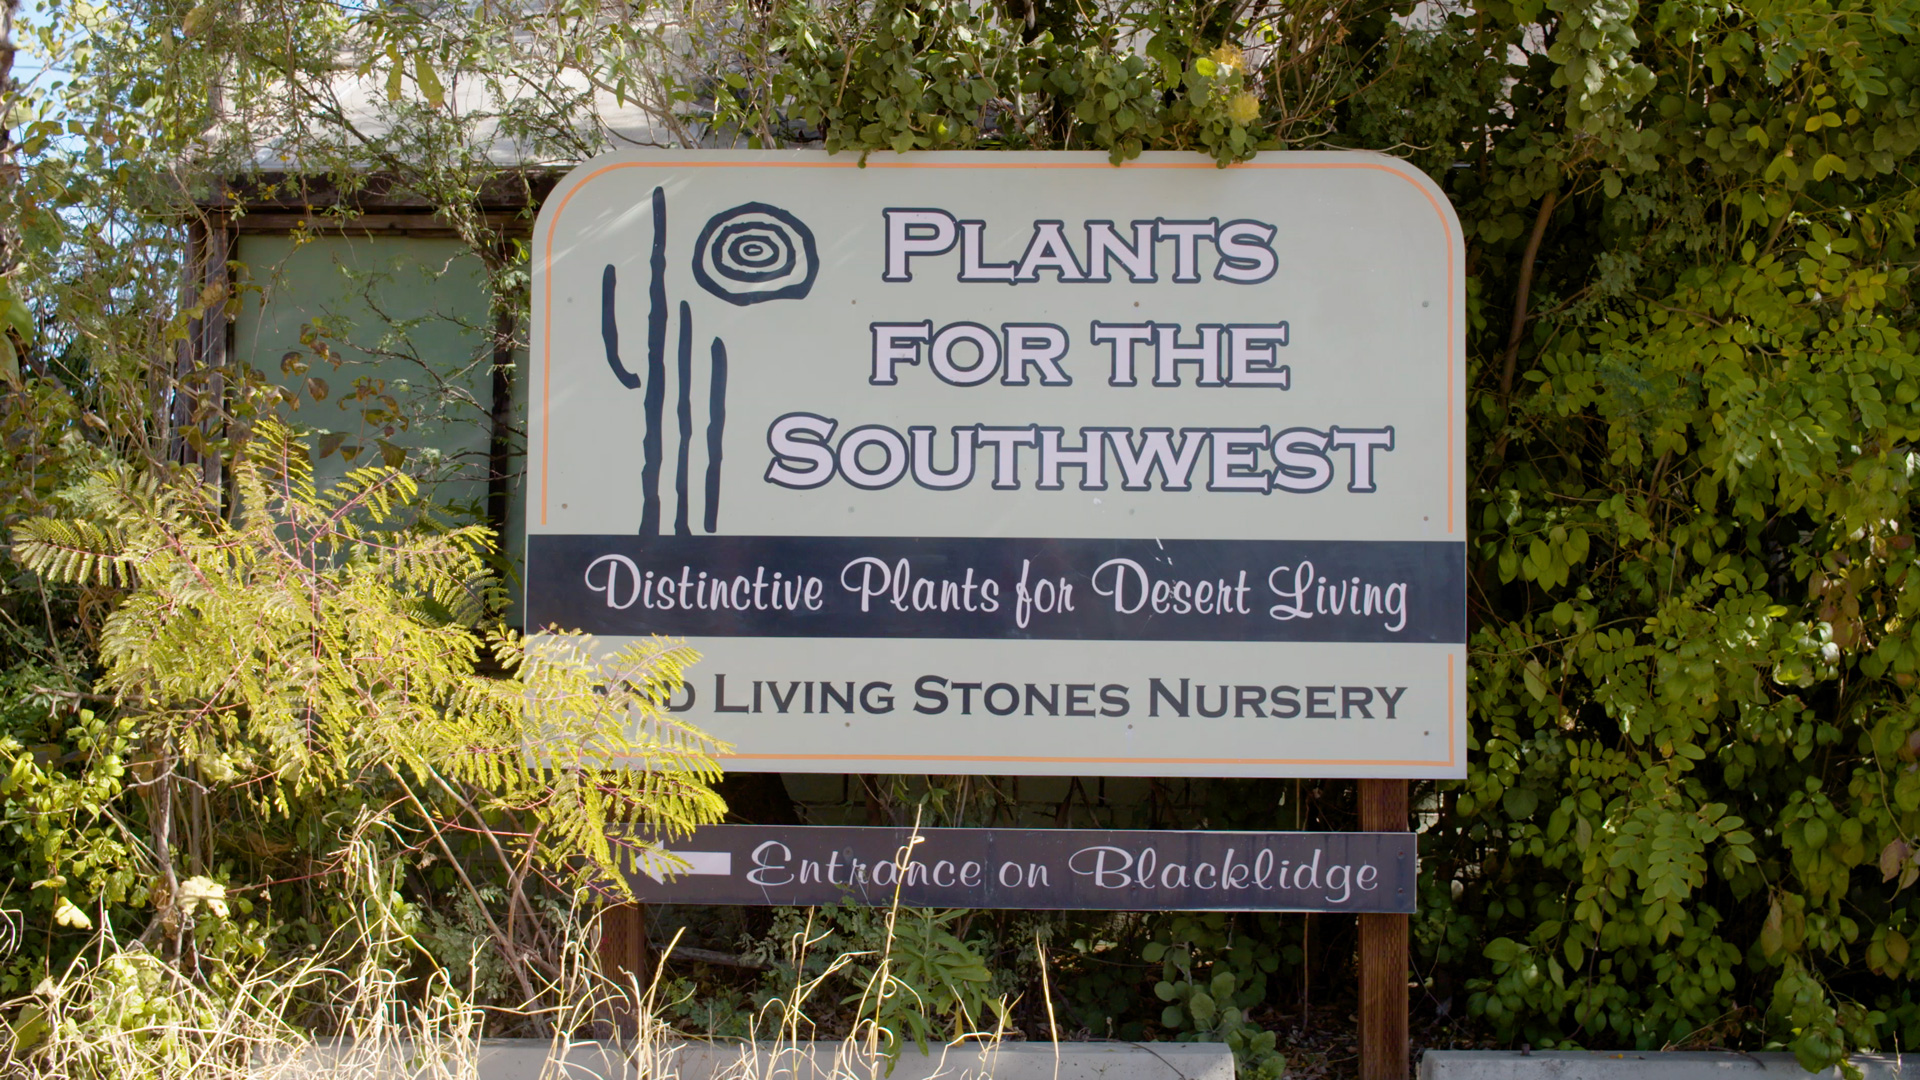 Plants for the Southwest